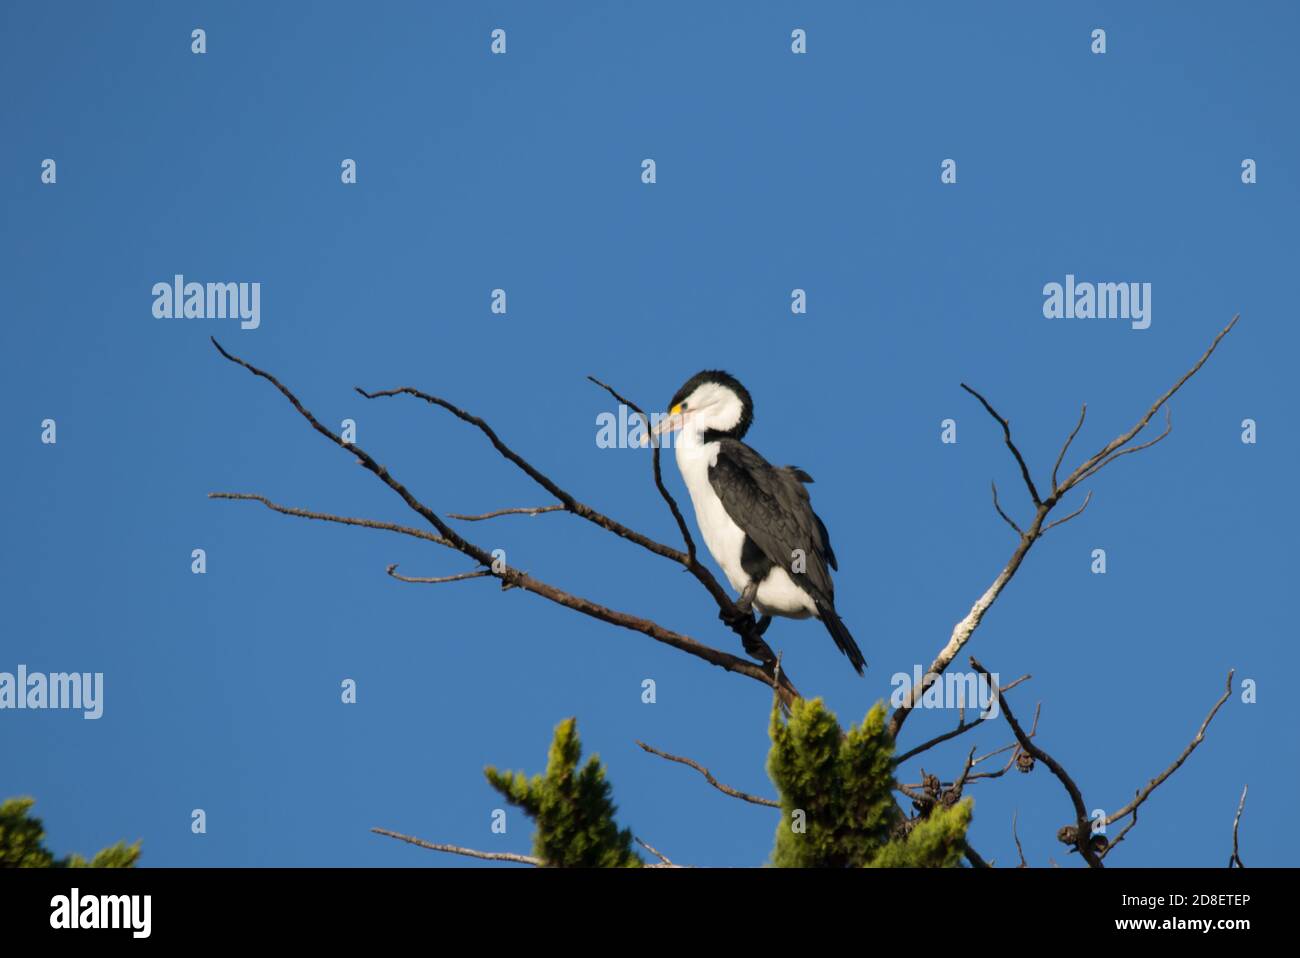 The Australian Pied Cormorant (Phalacrocorax varius), is also known as the Pied Cormorant, Pied Shag, and the Great Pied Cormorant Stock Photo